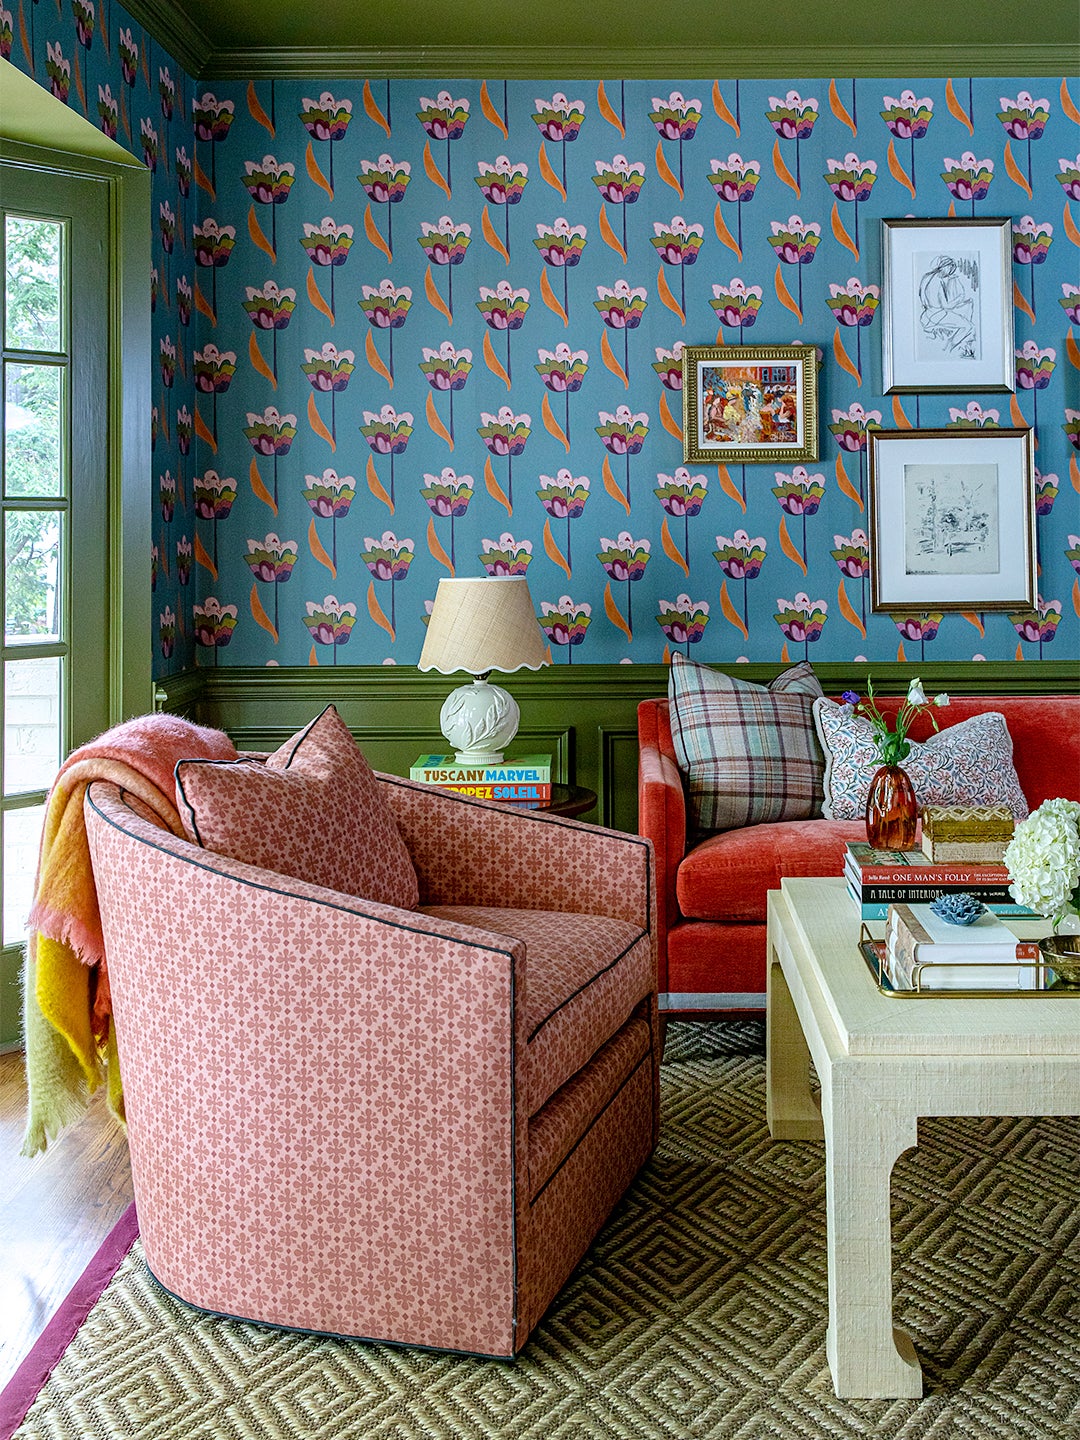 Floral Wallpaper Room with Red Sofa and Pink Chair and Green Trim